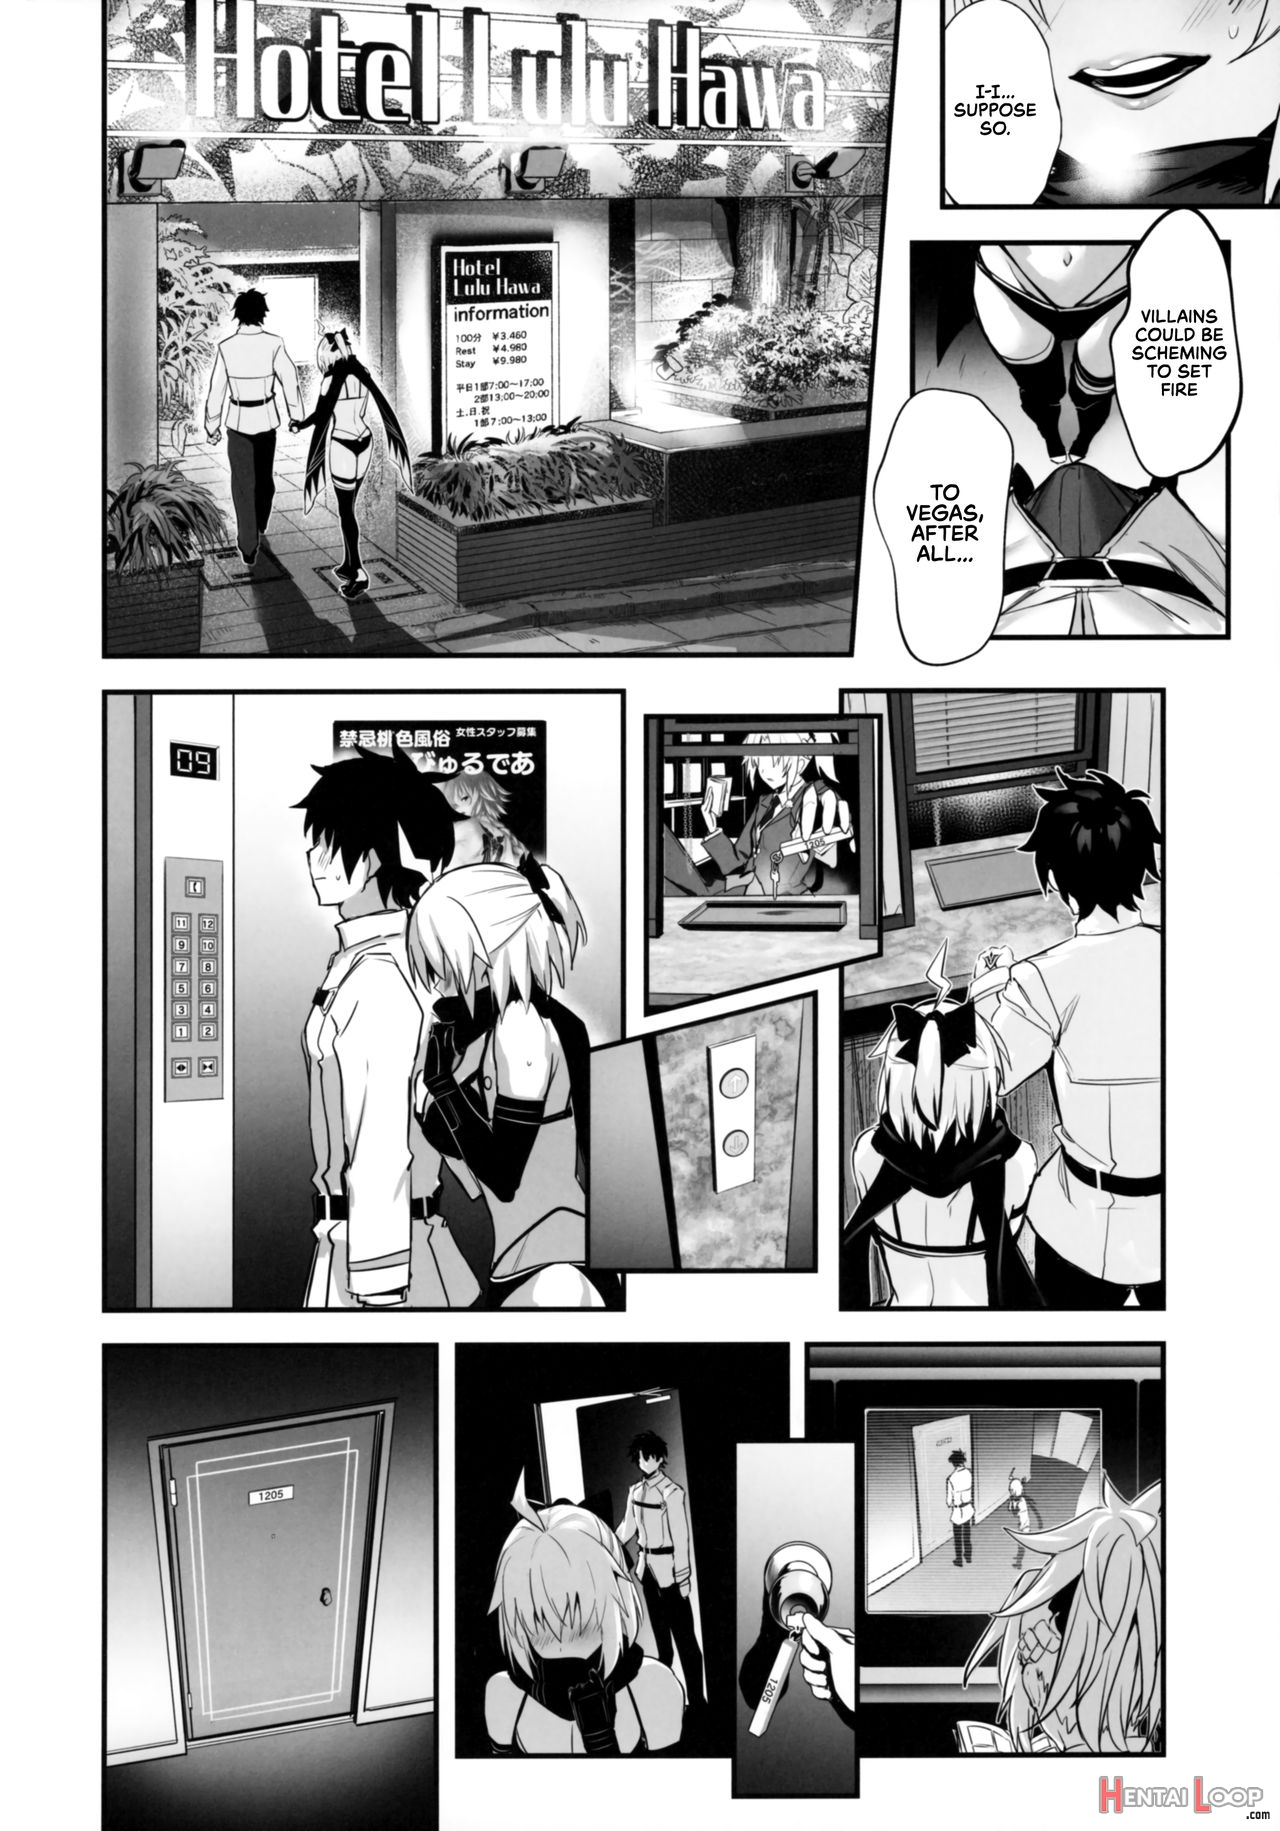 Swimsuit Sex With Okita-san At A Love Hotel Until Morning page 6